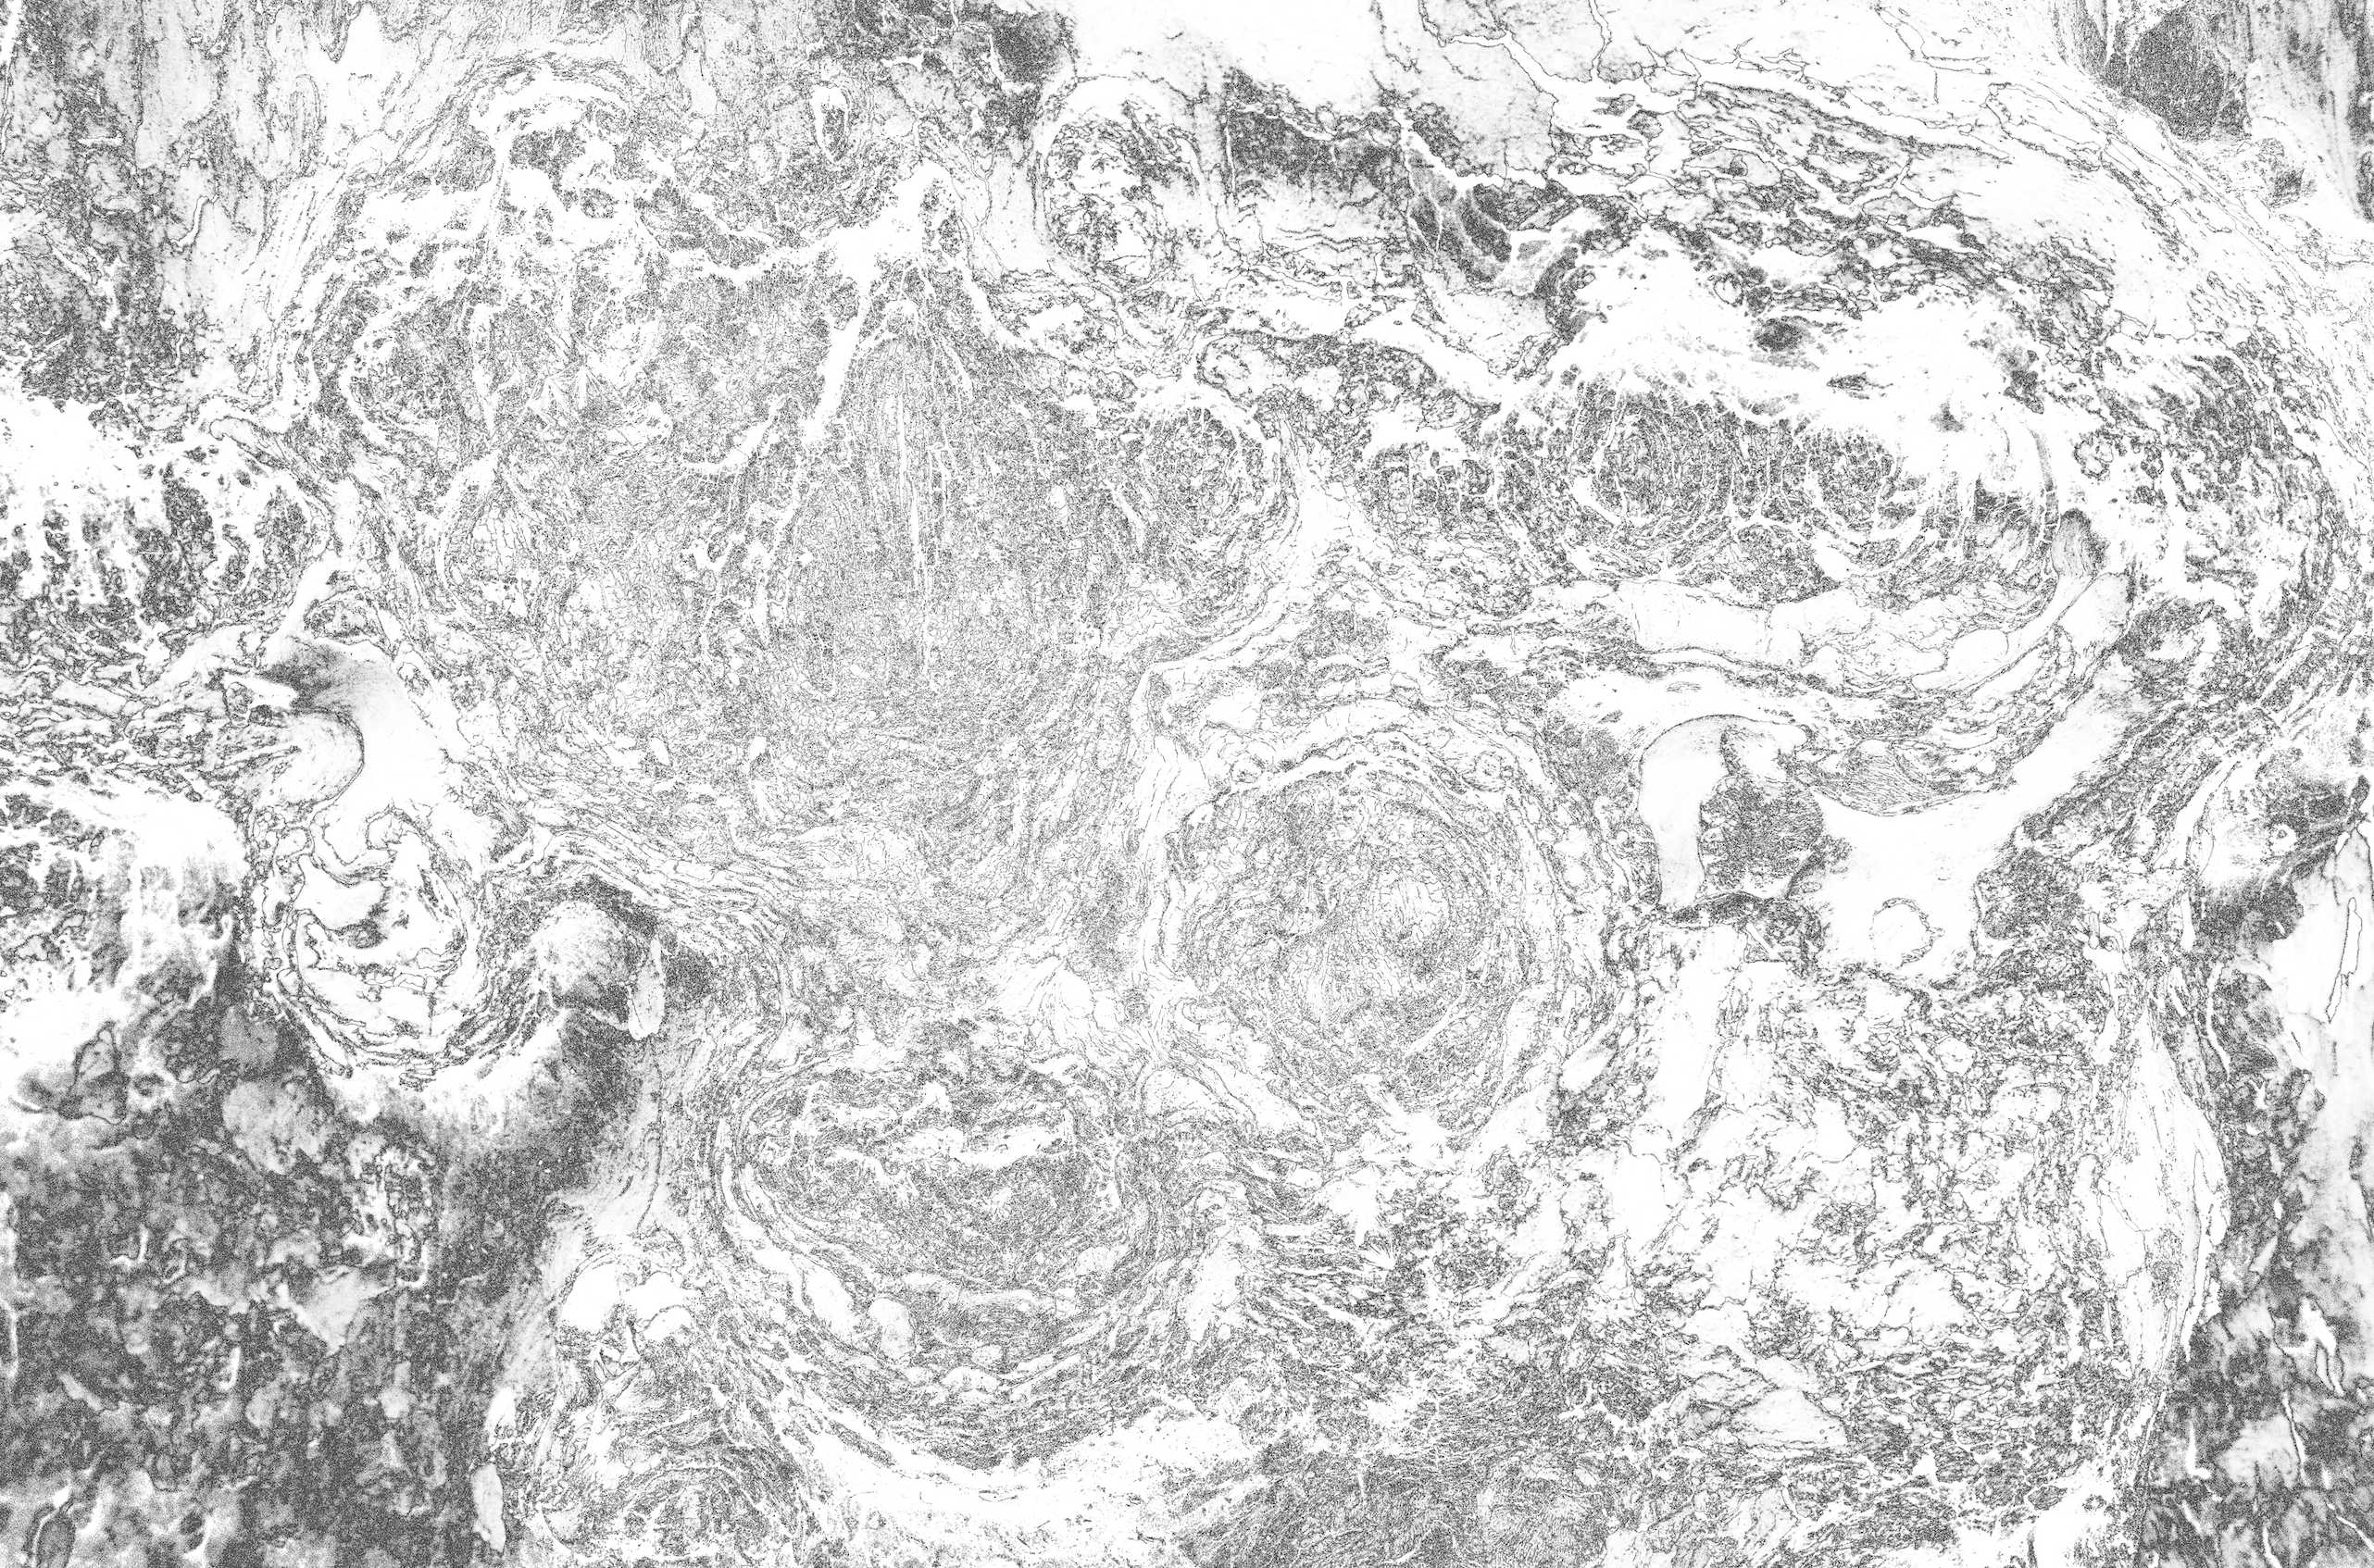 a black and white image of a swirly pattern